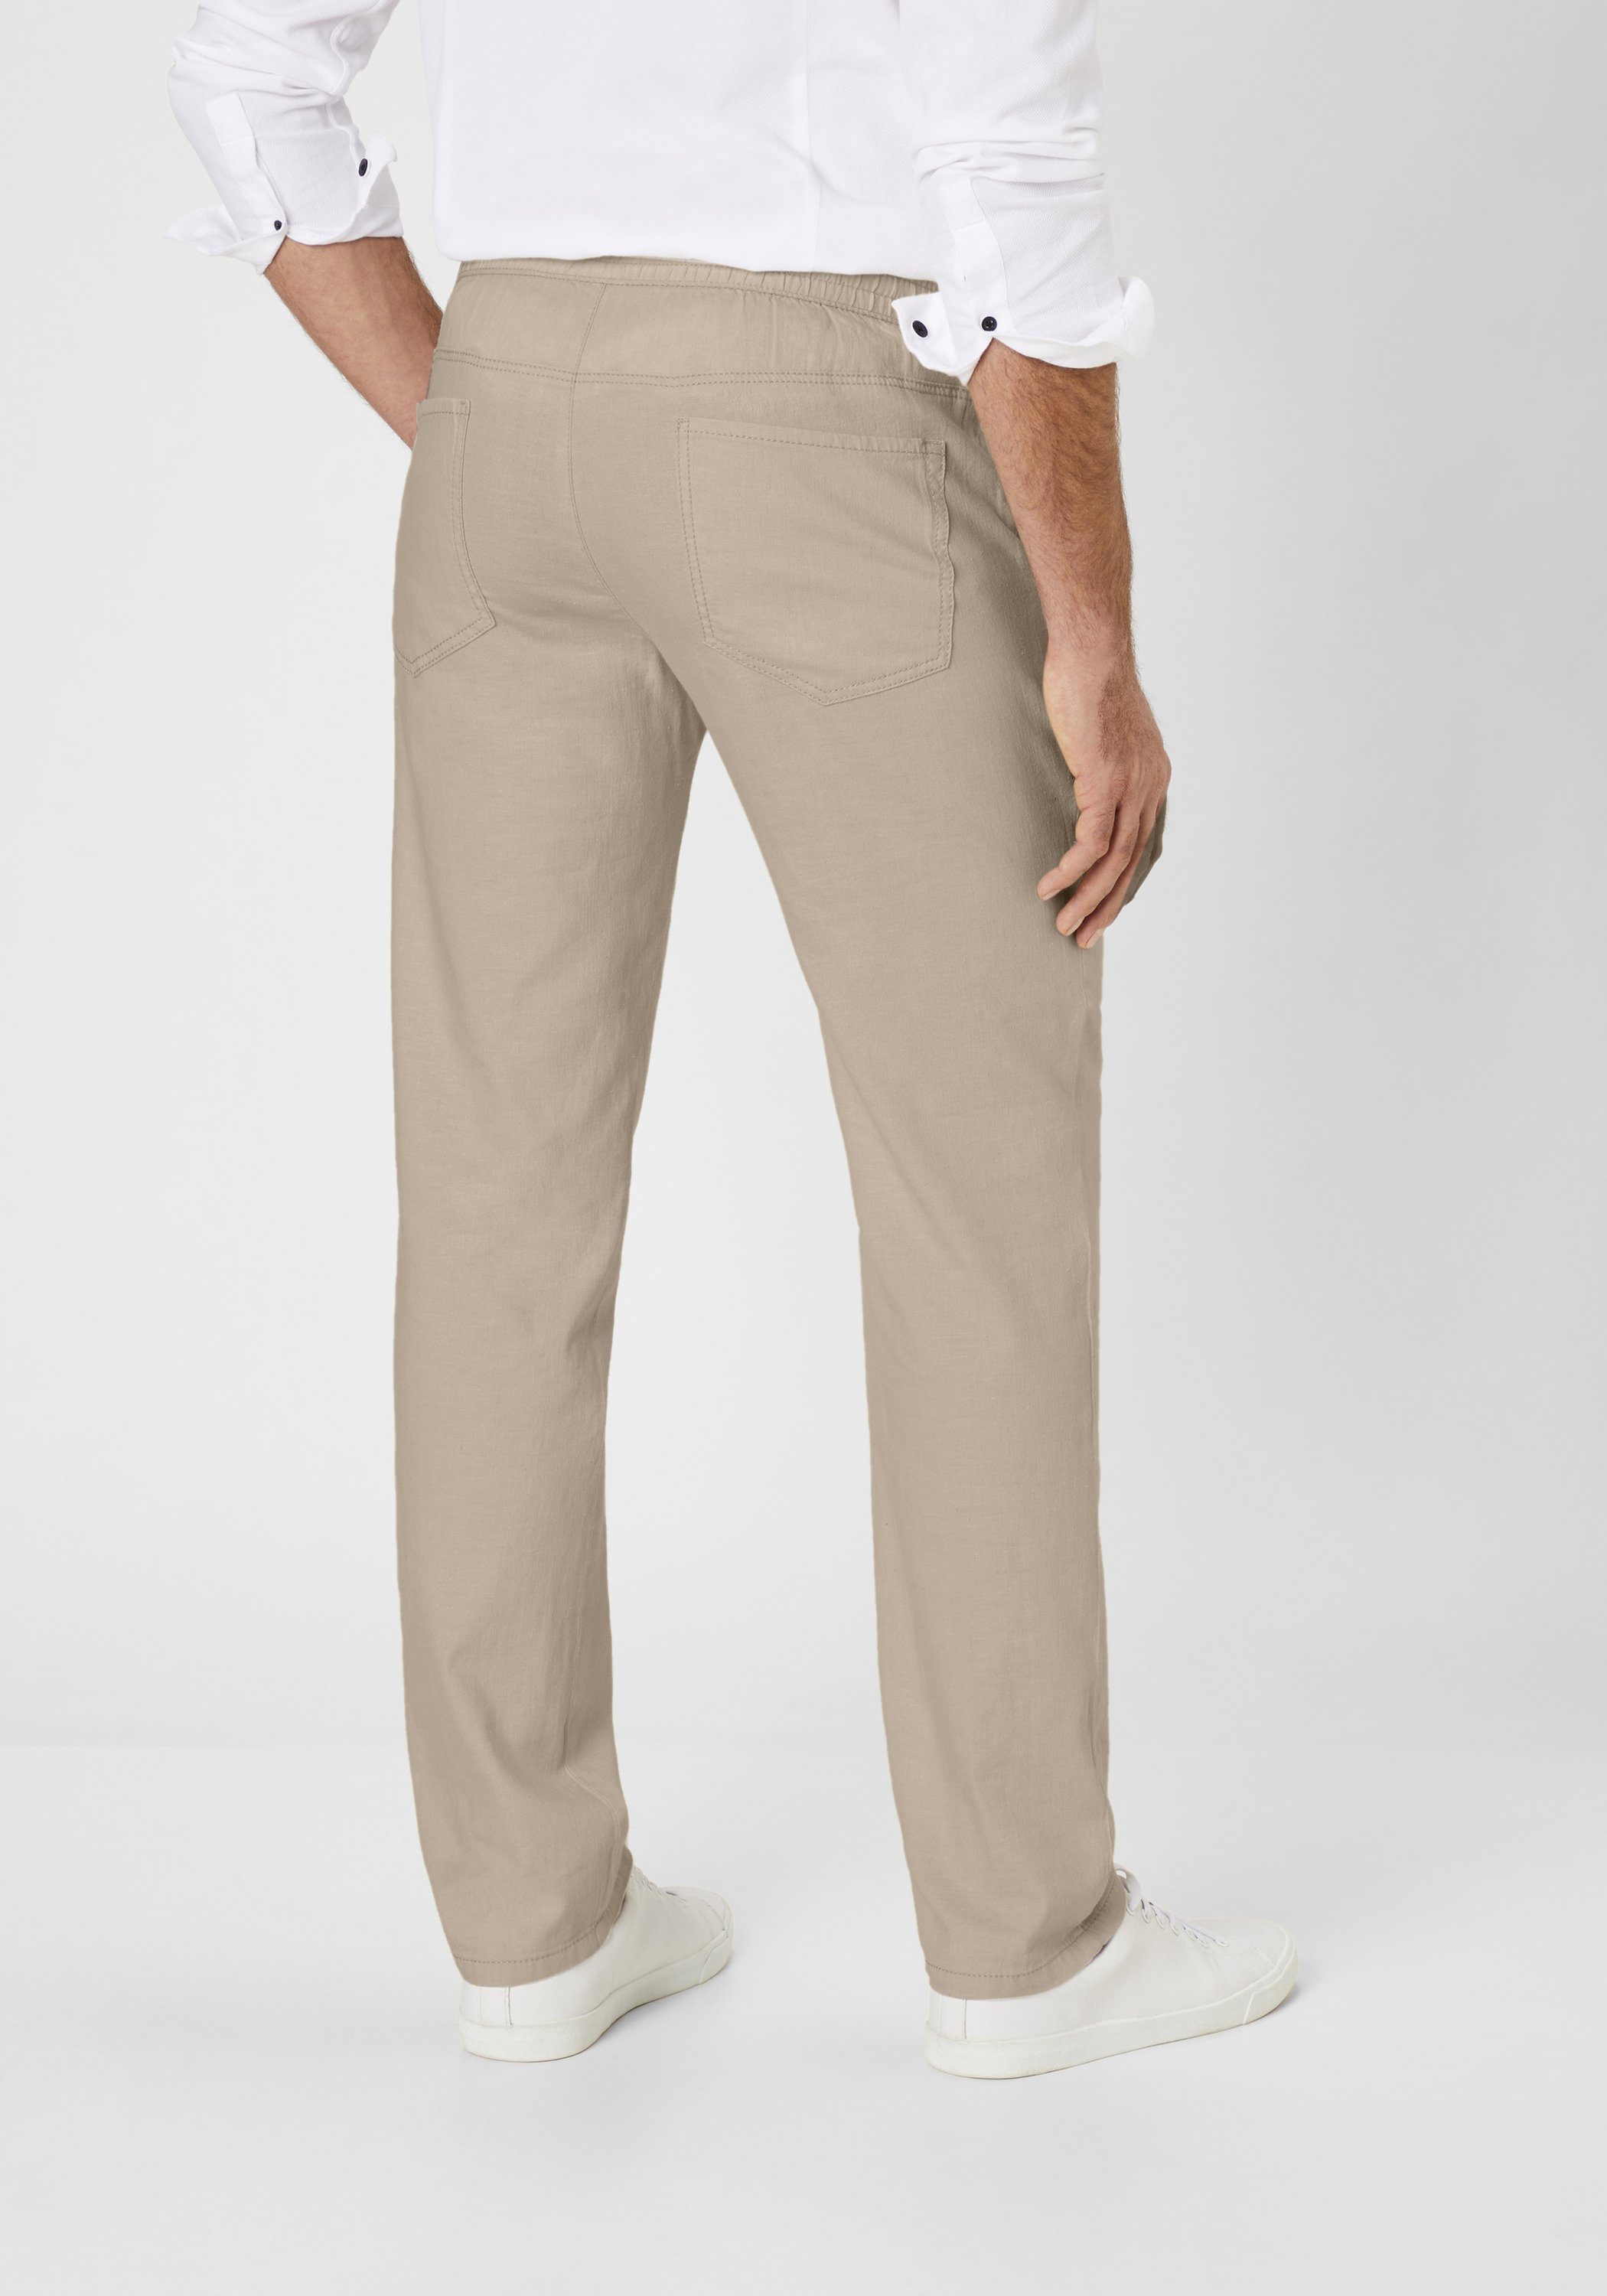 leichte Carden beige Redpoint Stretch-Chinohose Chinohose Sehr